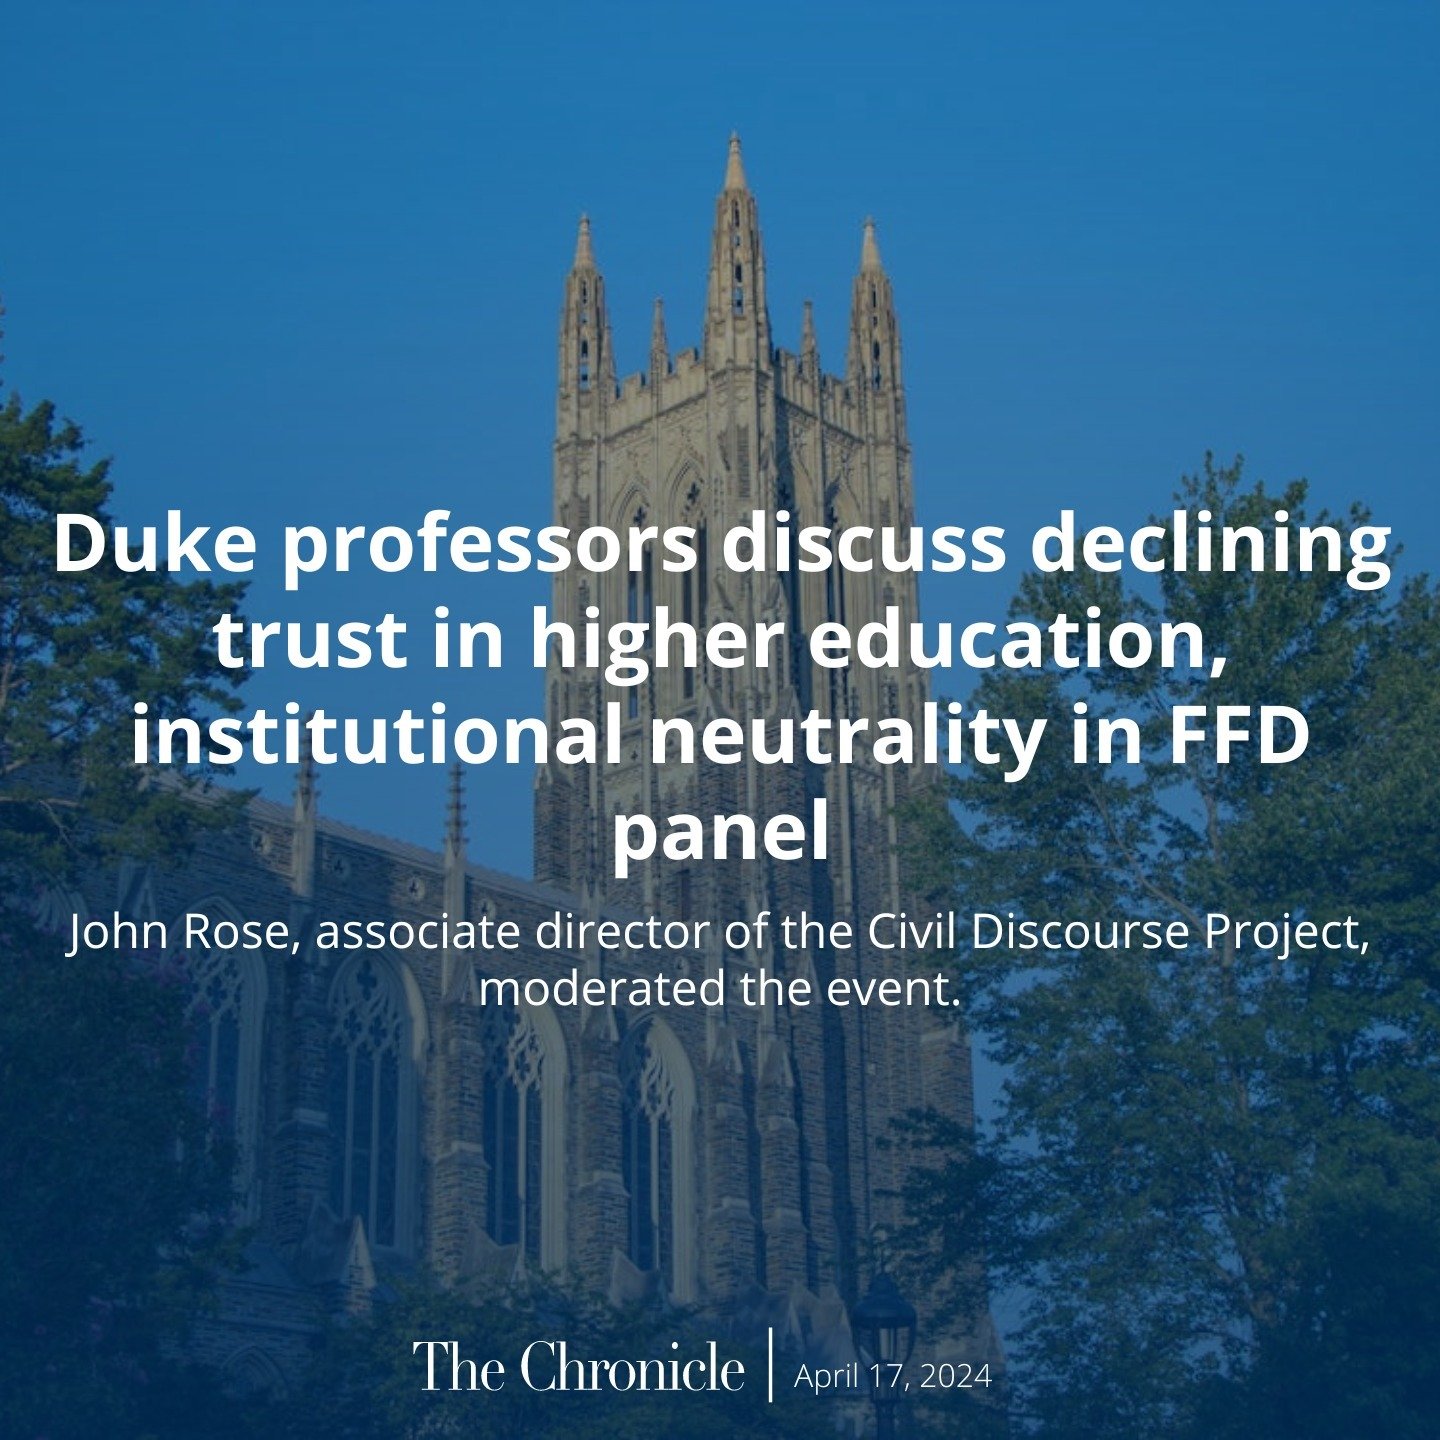 Duke professors discussed trust in higher education, free speech on campus and institutional neutrality at a Saturday panel hosted by Friends for Free Speech and Intellectual Diversity at Duke.

Panelists included Nita Farahany, Robinson O. Everett d